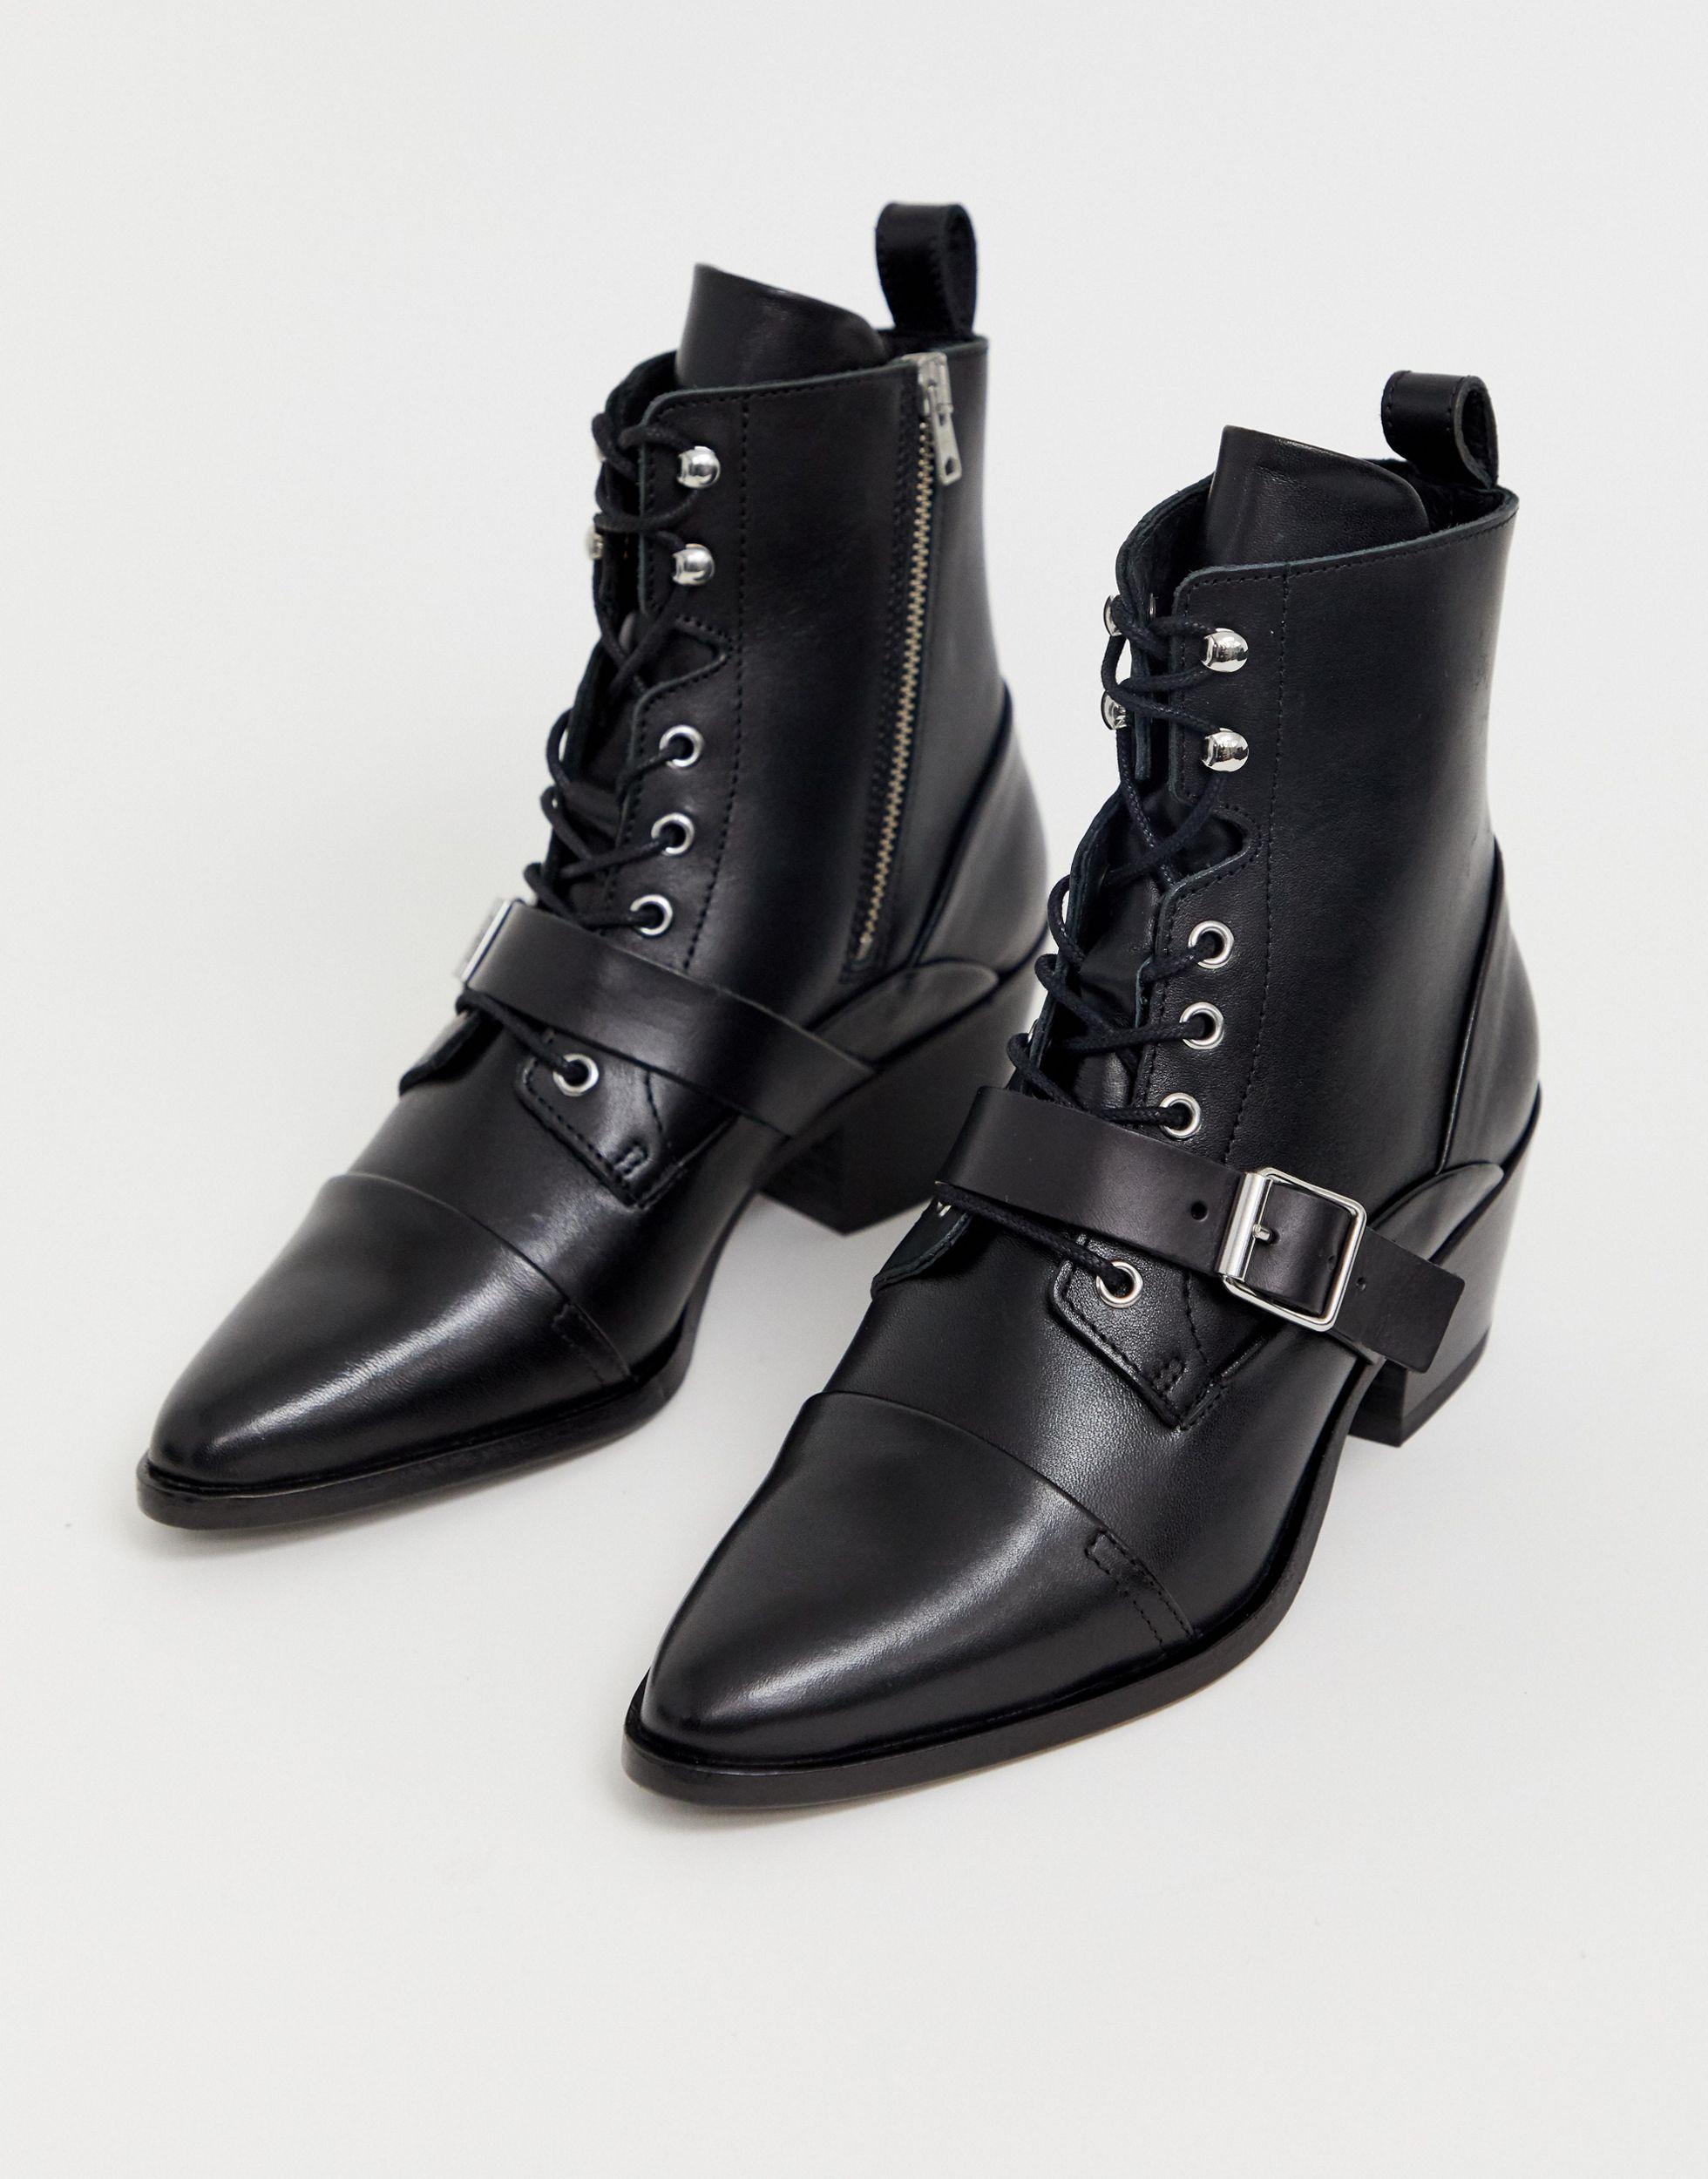 AllSaints Women's Black Katy Lace Up Heeled Leather Boots With Buckle